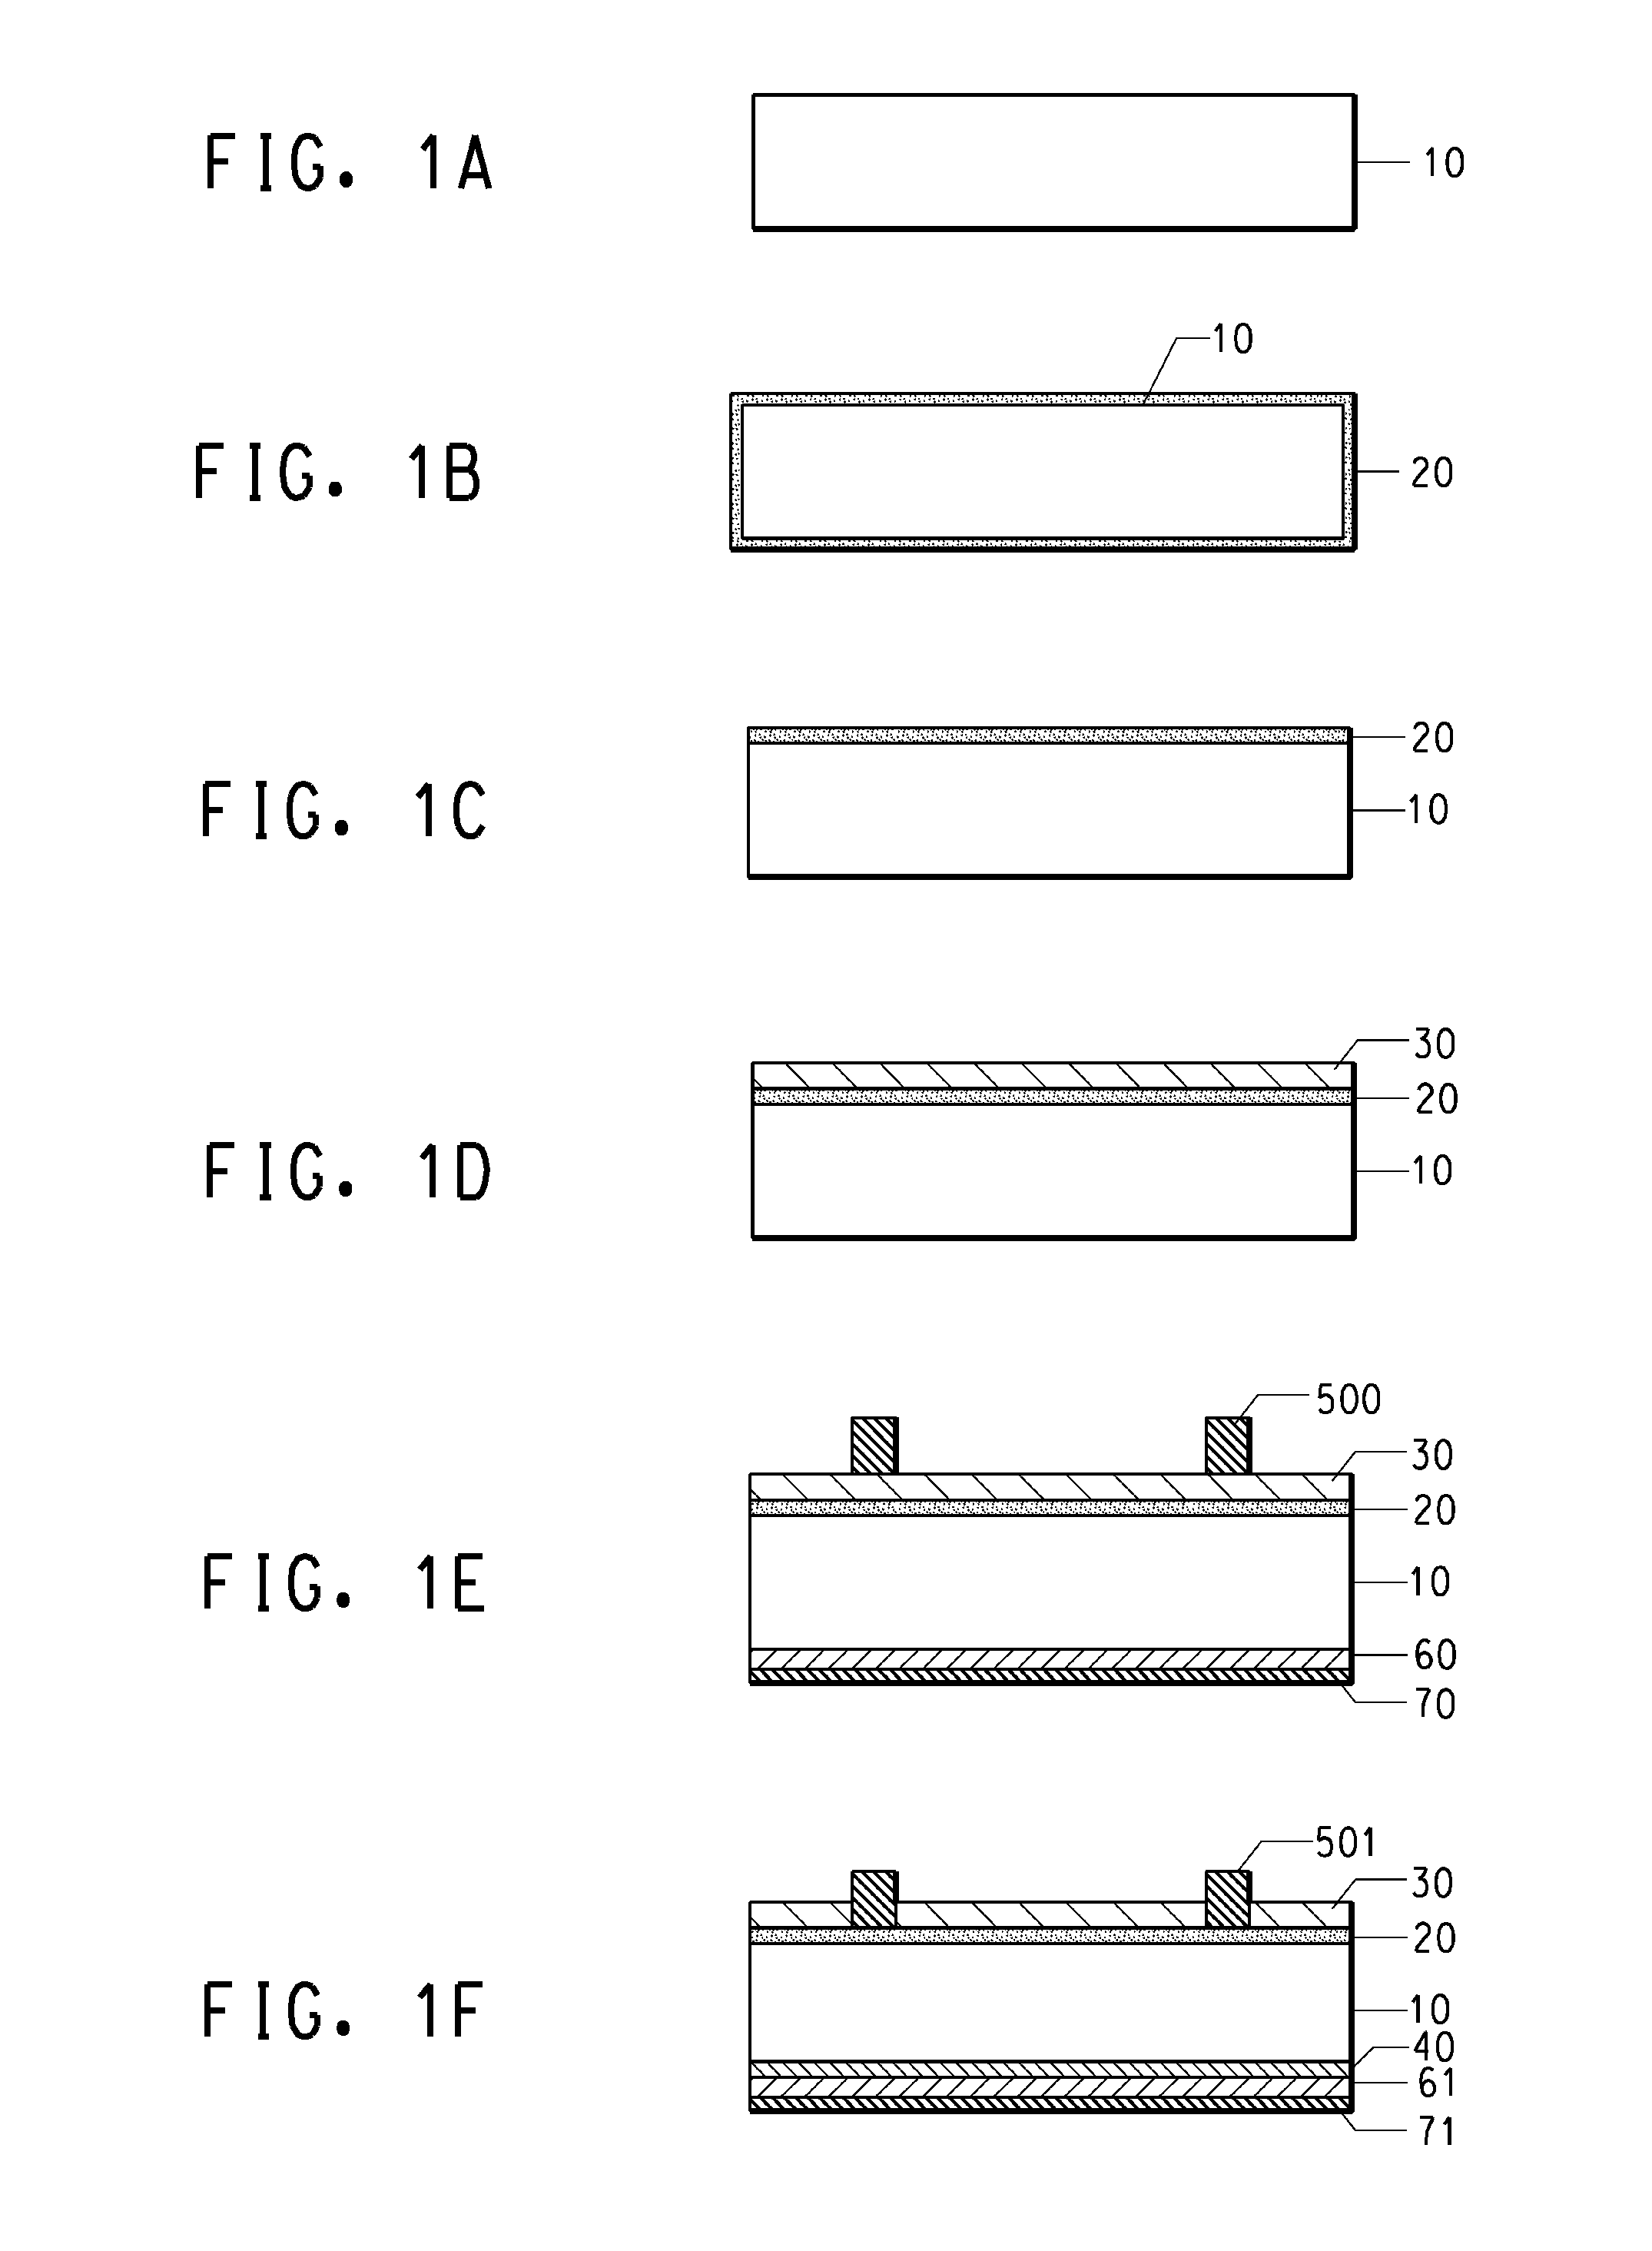 Thick-film pastes containing lead-tellurium-boron-oxides, and their use in the manufacture of semiconductor devices